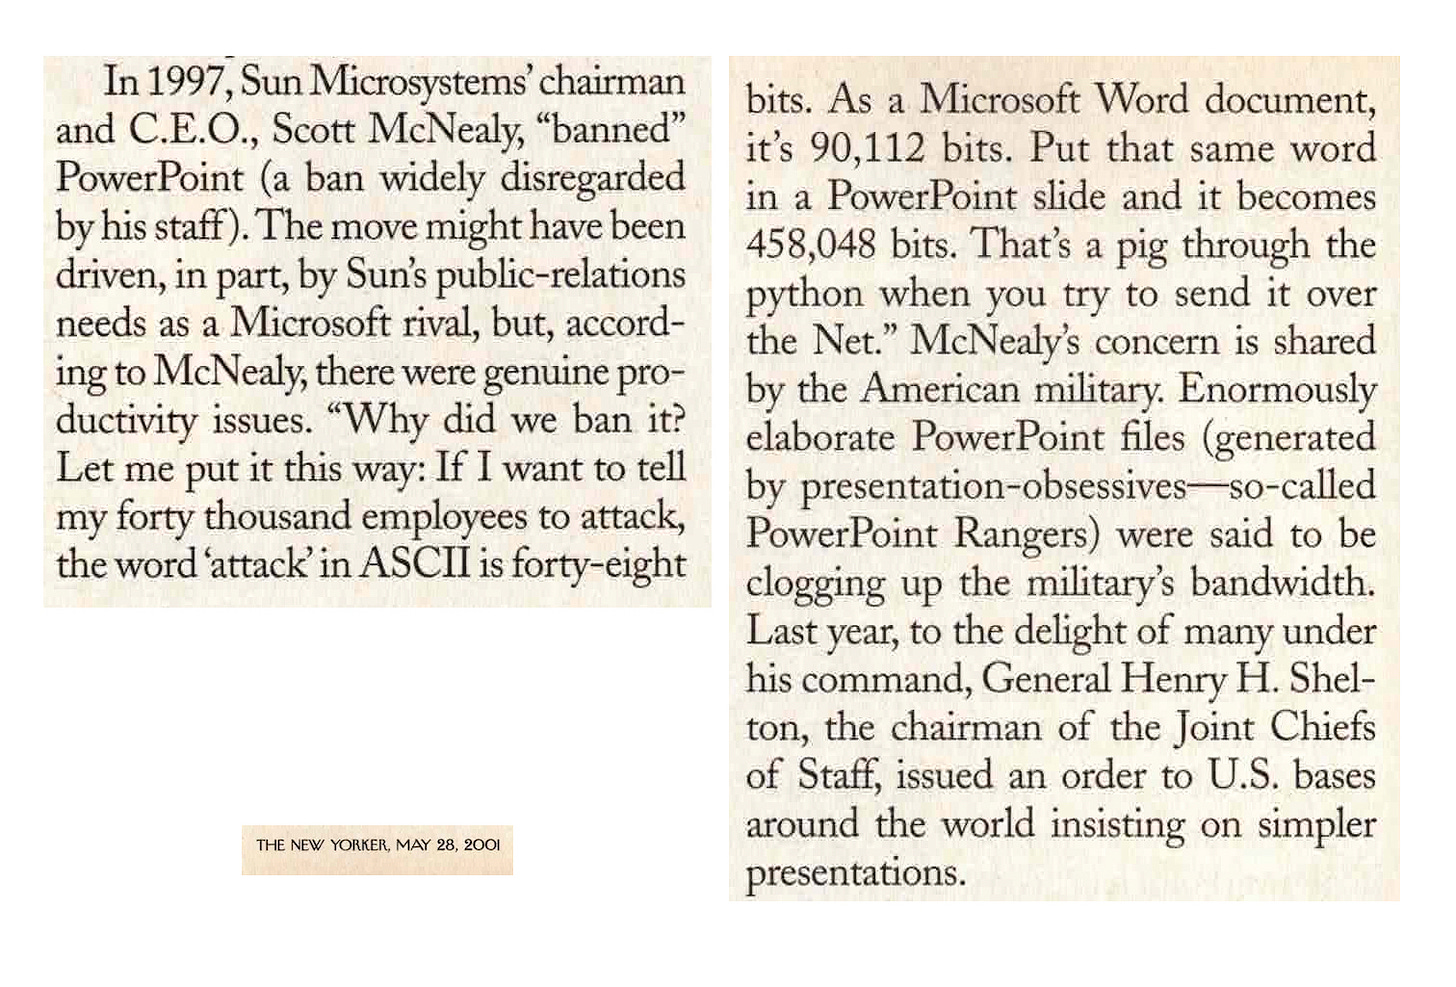 Scan of actual article featuring this quote "Why did we ban it? Let me put it this way: If I want to tell my forty thousand employees to attack, the word “attack” in ASCII is forty-eight bits. As a Microsoft Word document, it’s 90,112 bits. Put that same word in a PowerPoint slide and it becomes 458,048 bits. That’s a pig through the python when you try to send it over the Net."